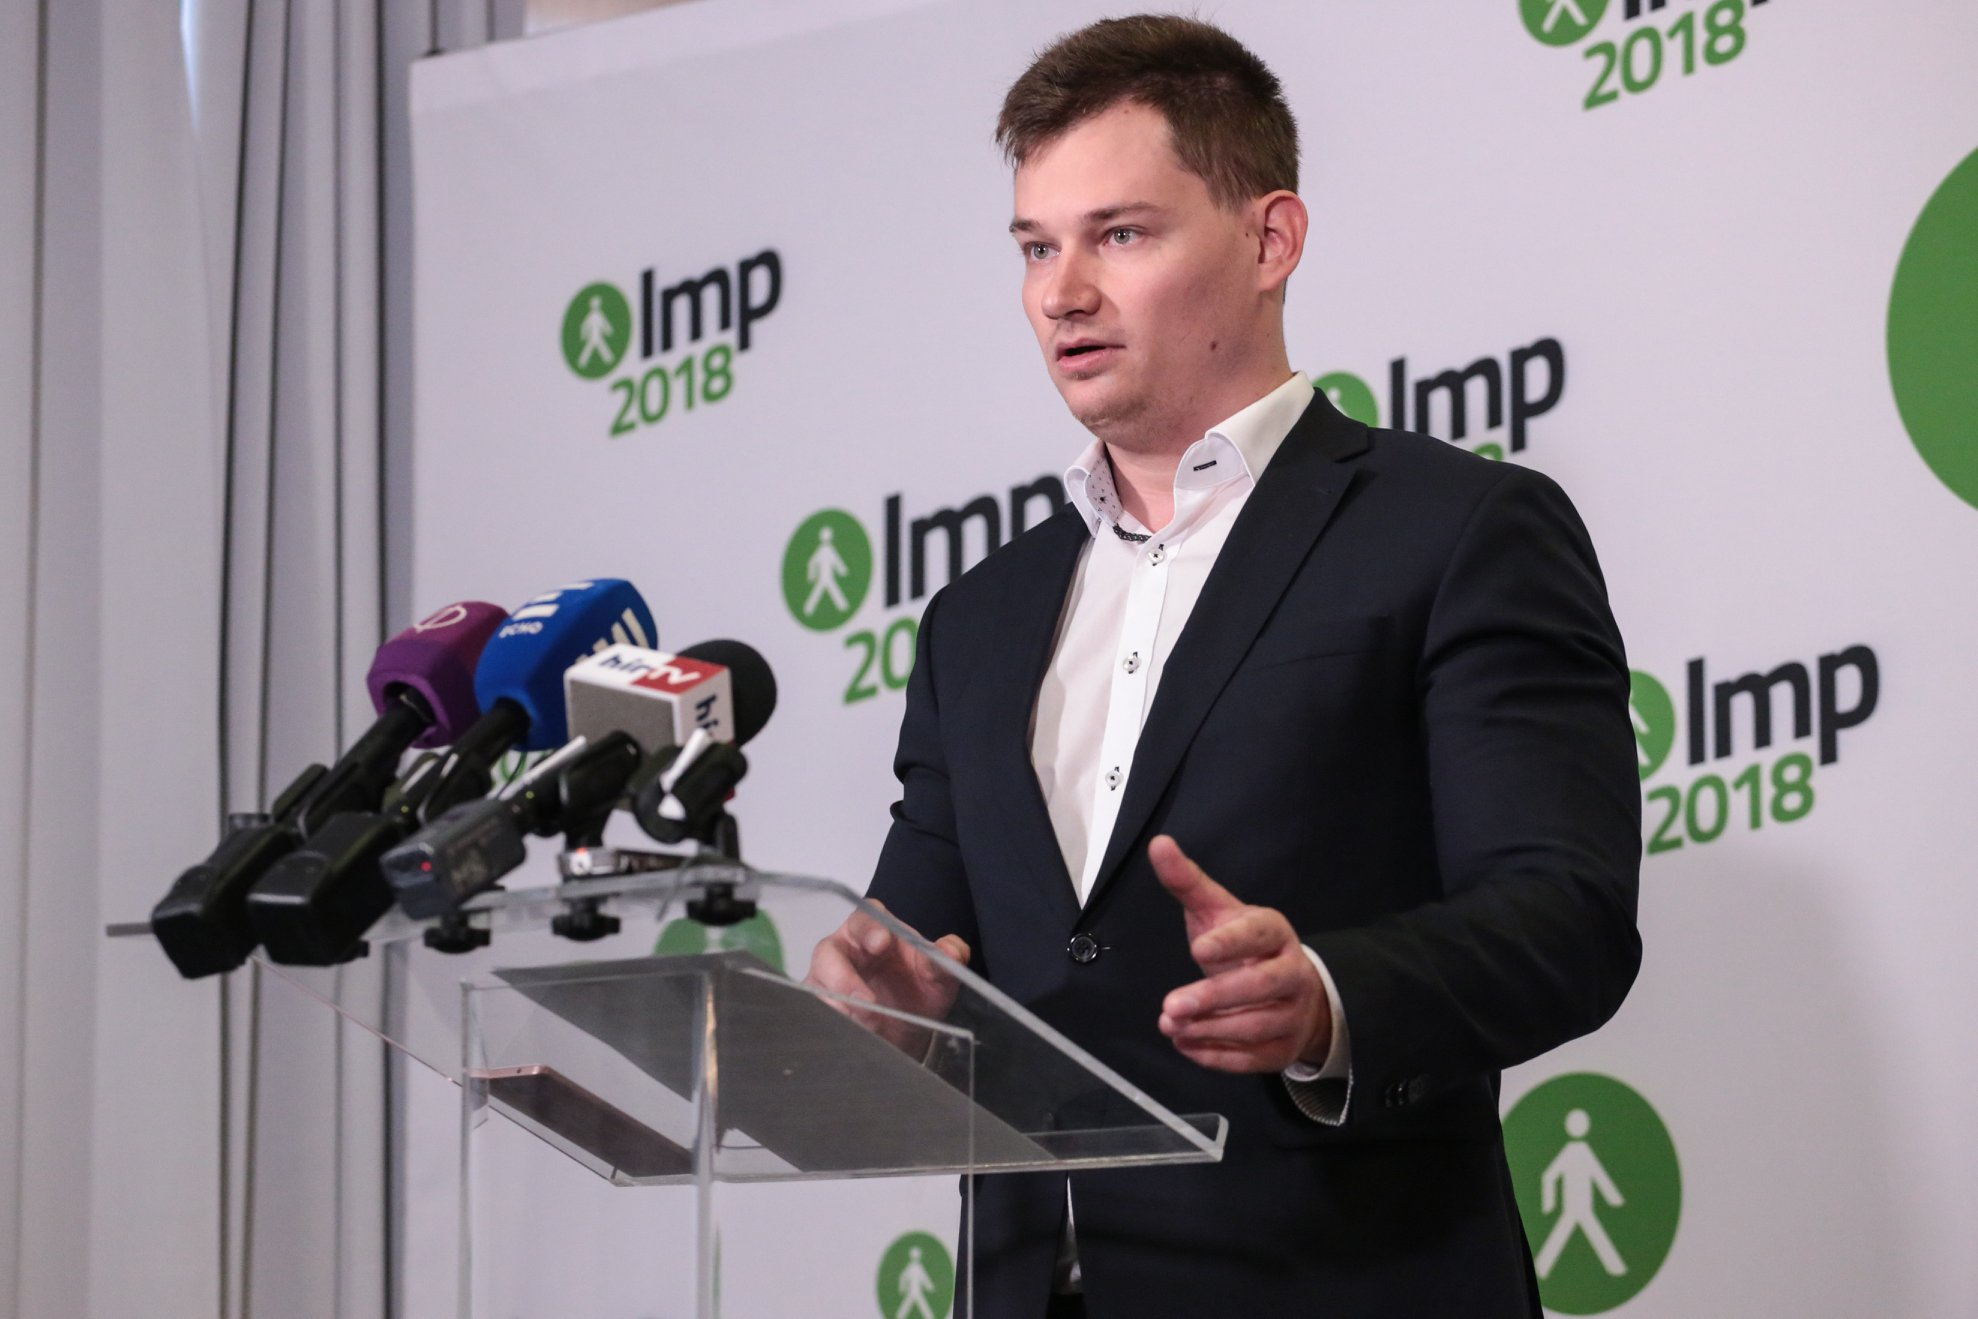 LMP Calls on Budapest Mayor Karácsony to Intensify Support for Green Policies